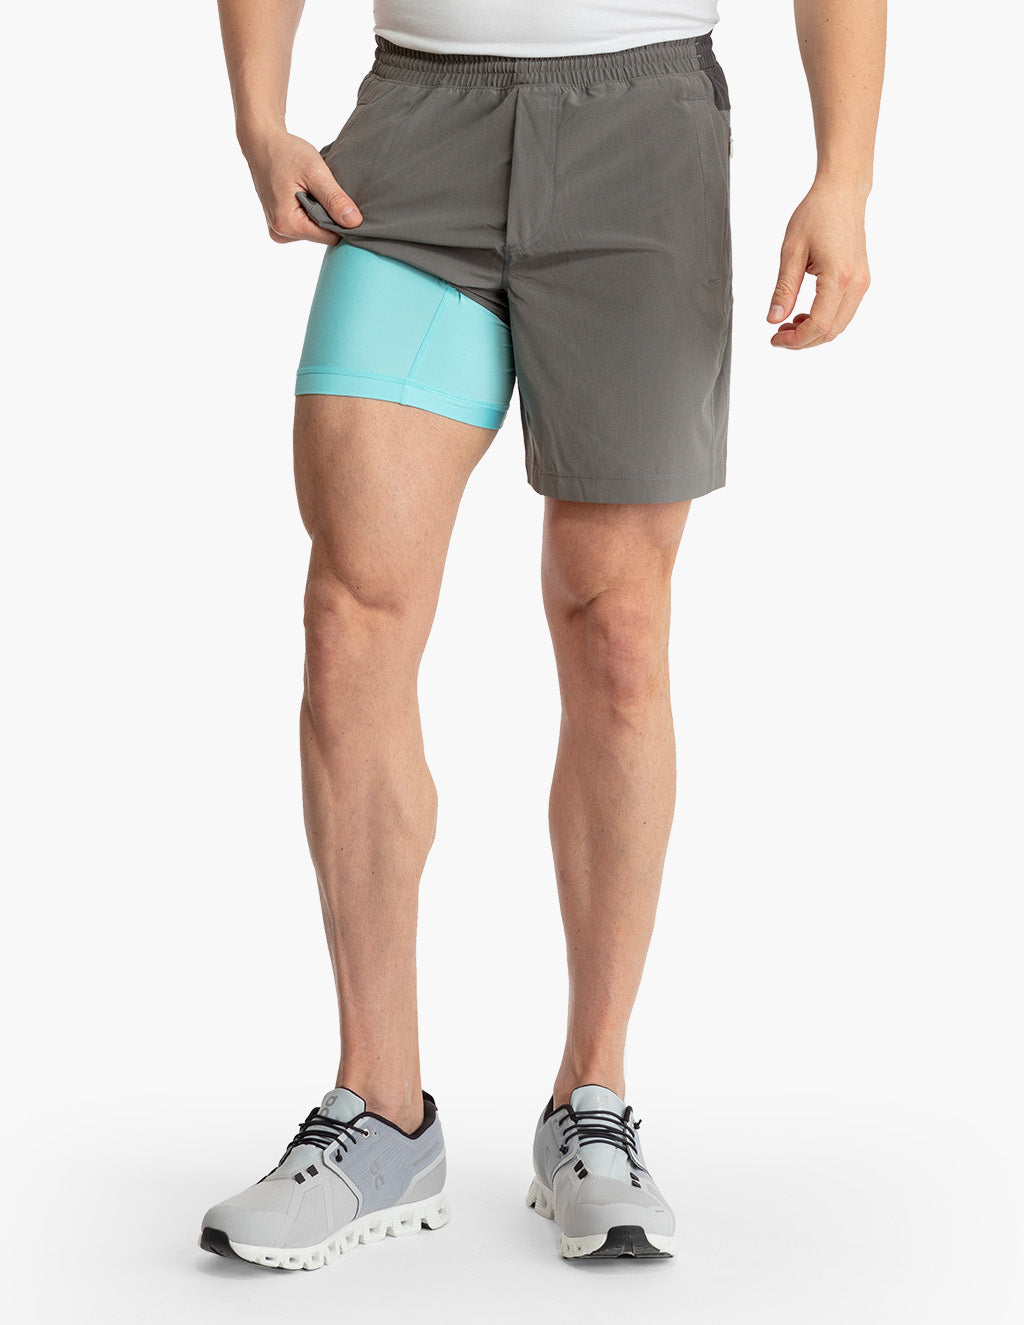 Men's 5 Inch Running Shorts With 2in1 Compression liners (🔥Buy 1 Get 1  Free)